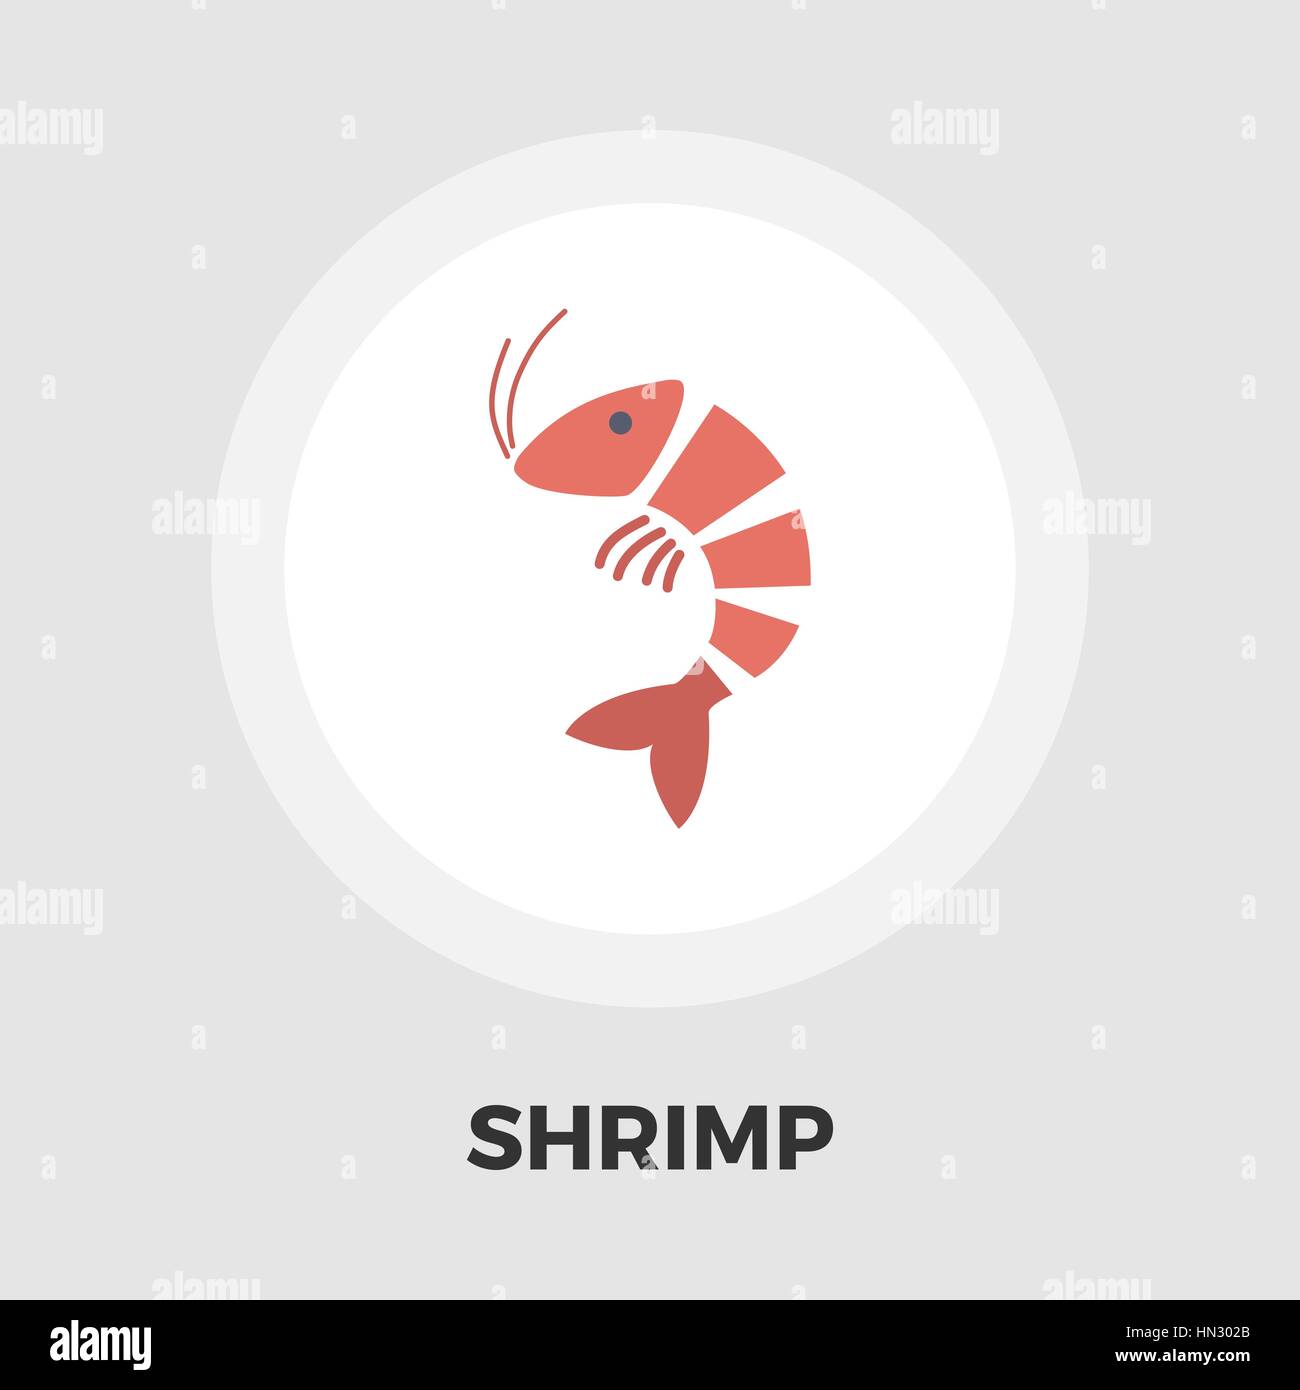 Shrimp icon vector. Flat icon isolated on the white background. Editable EPS file. Vector illustration. Stock Vector